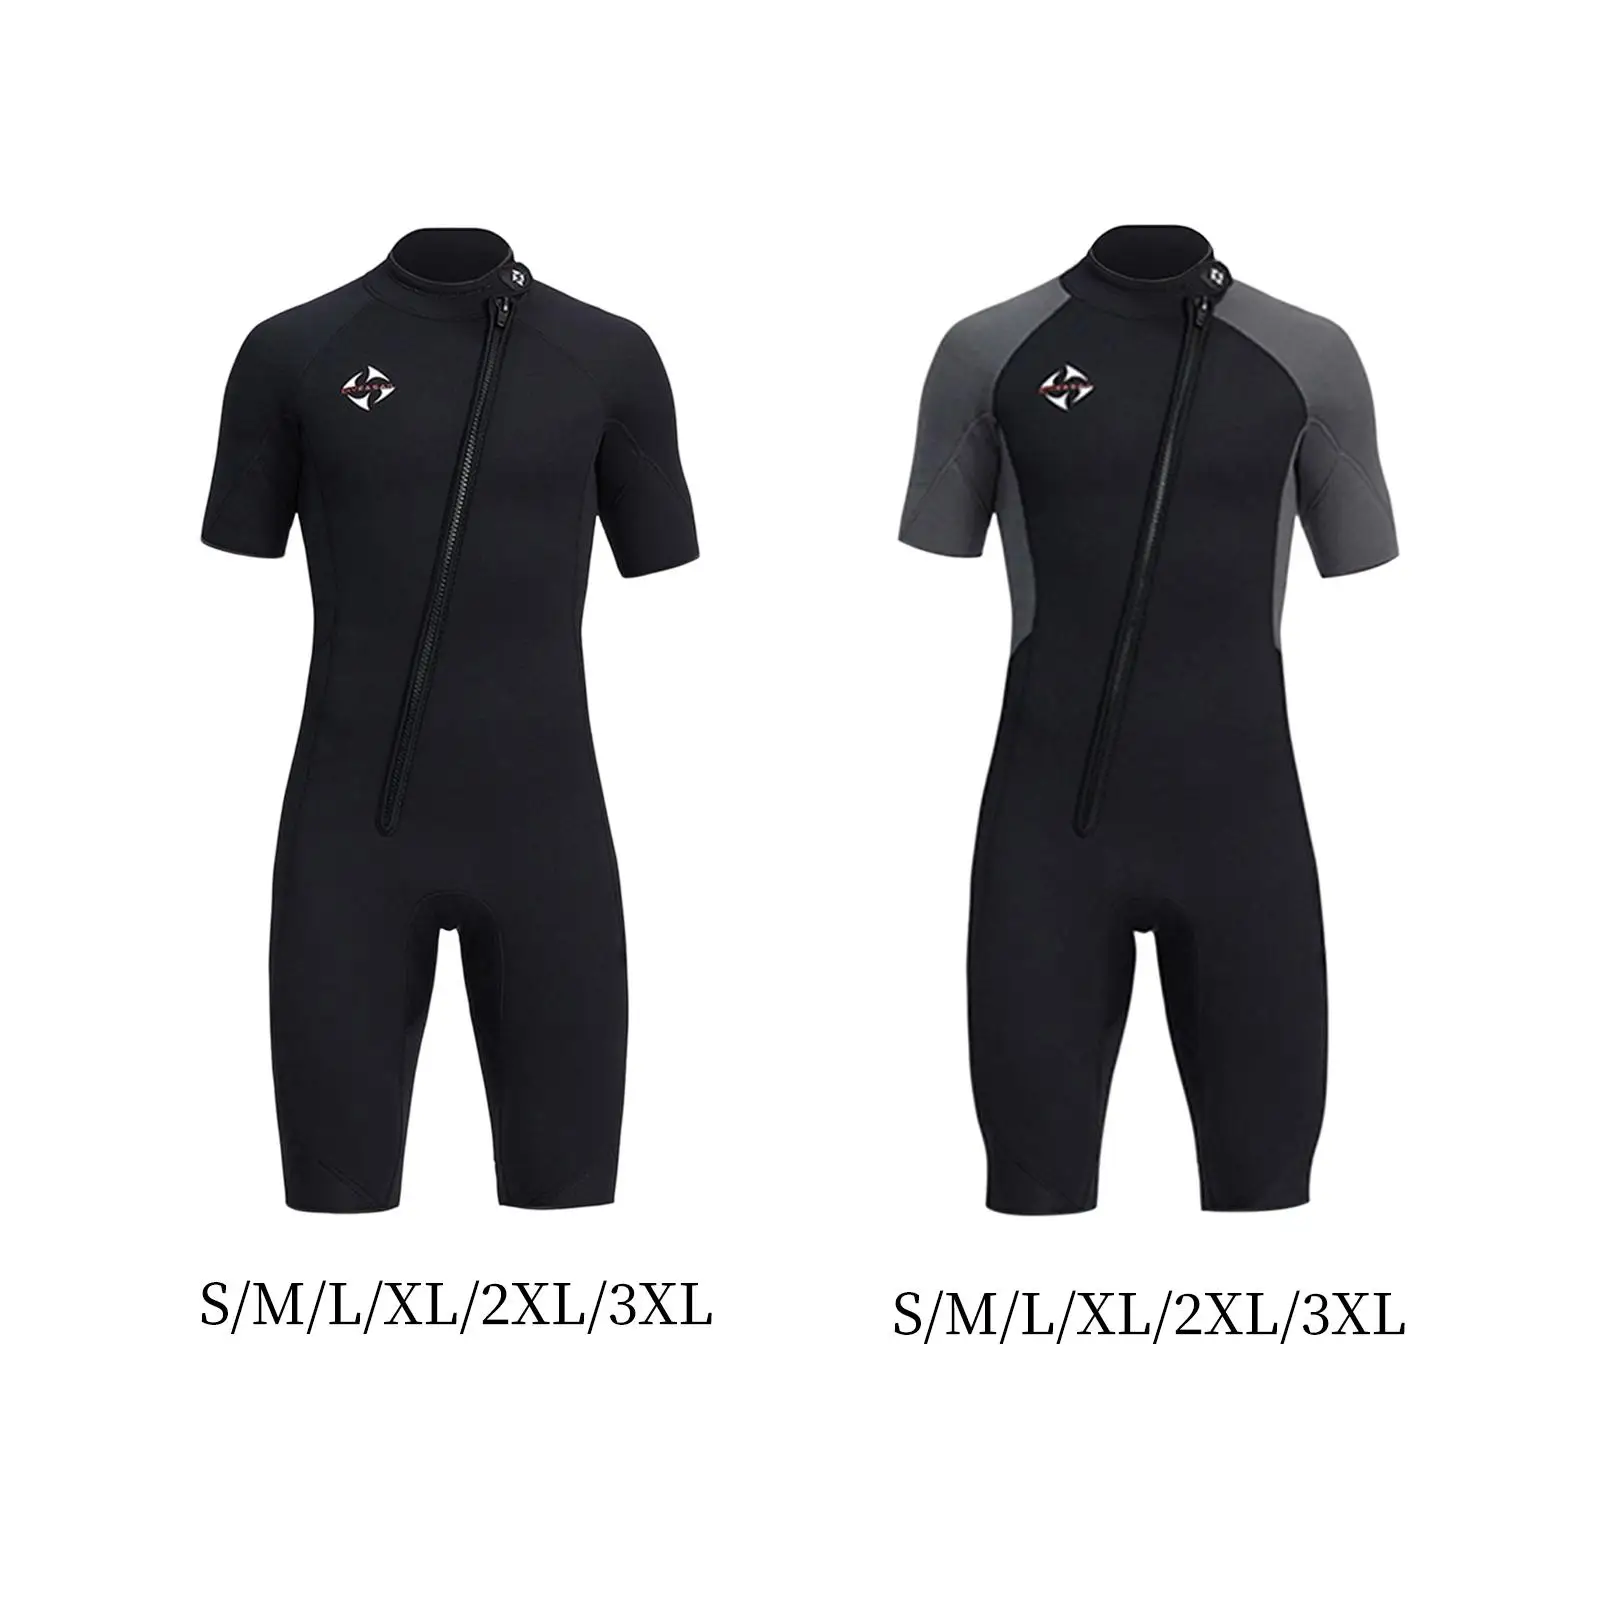 Men Wetsuit Diving Suit Short Sleeve Shorts Keep Warm for Surfing Diving